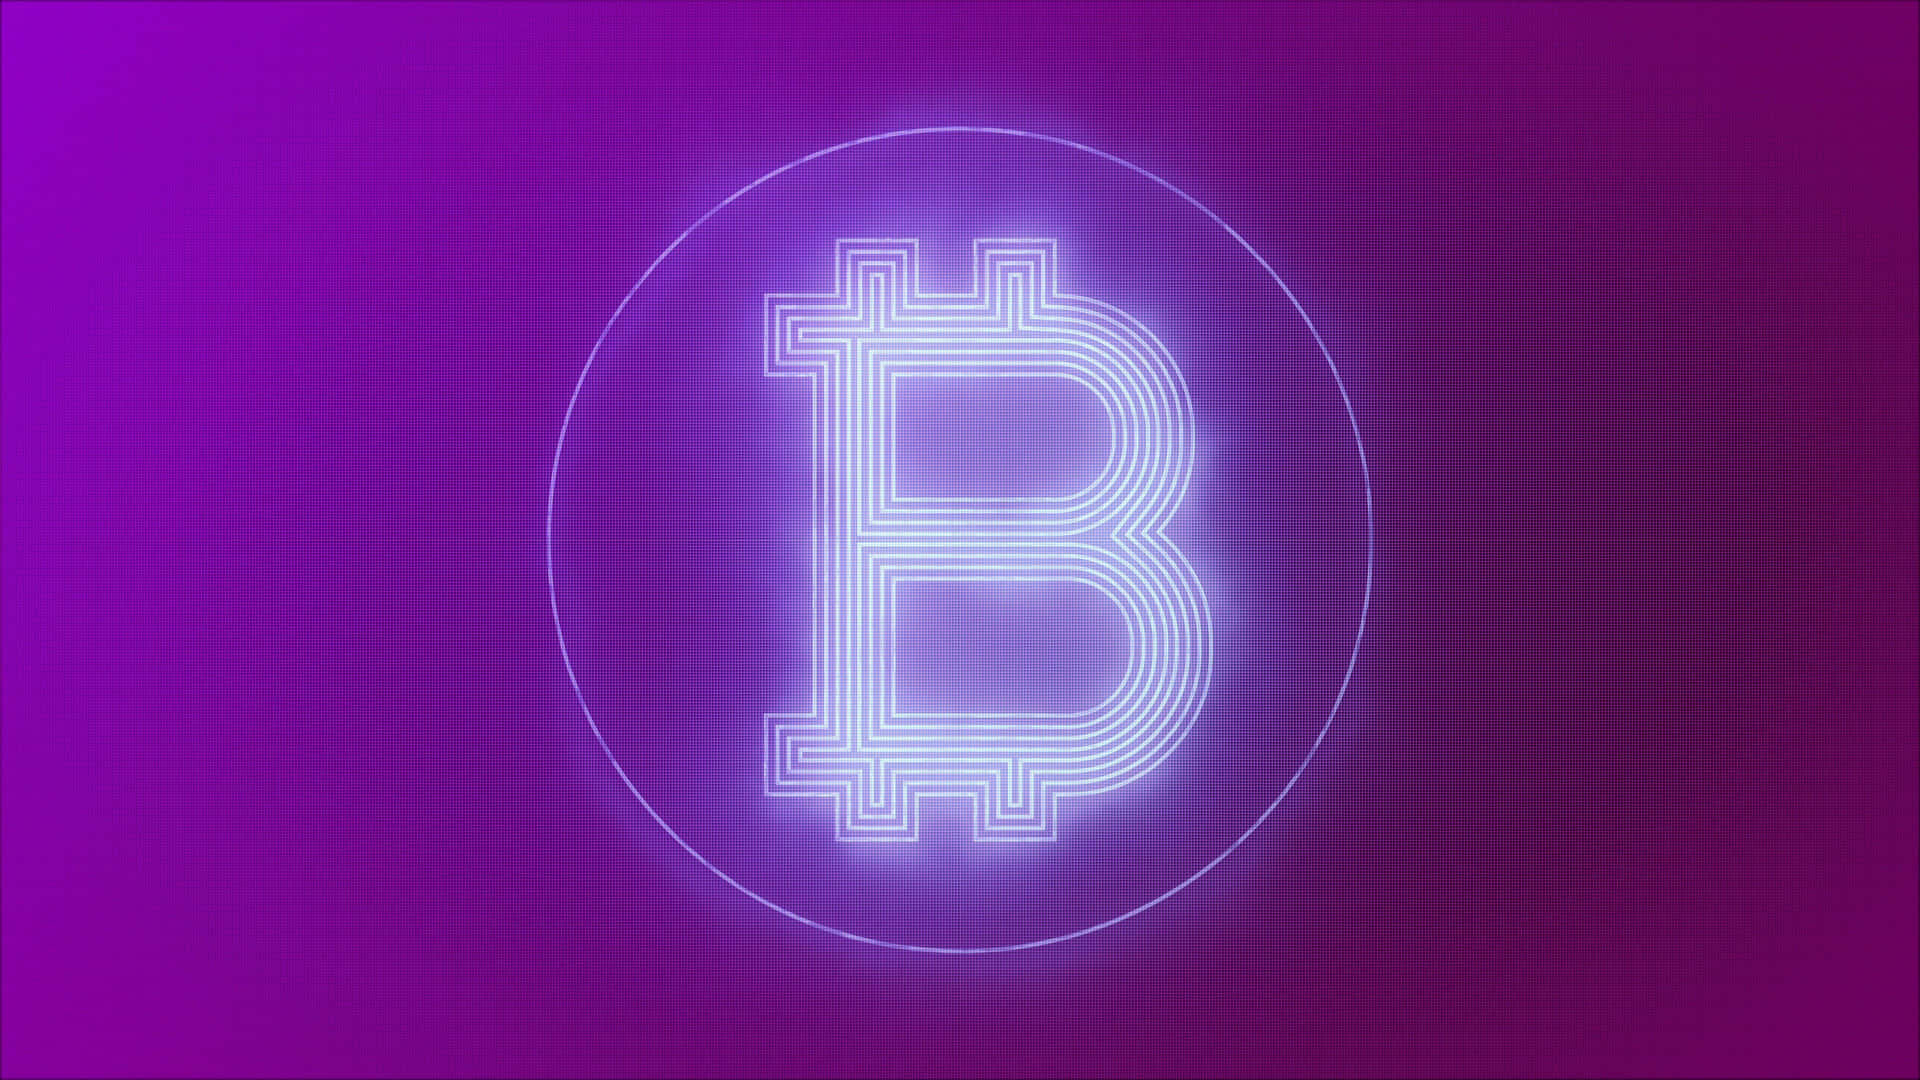 "Exponentially Investing In Bitcoin" Wallpaper